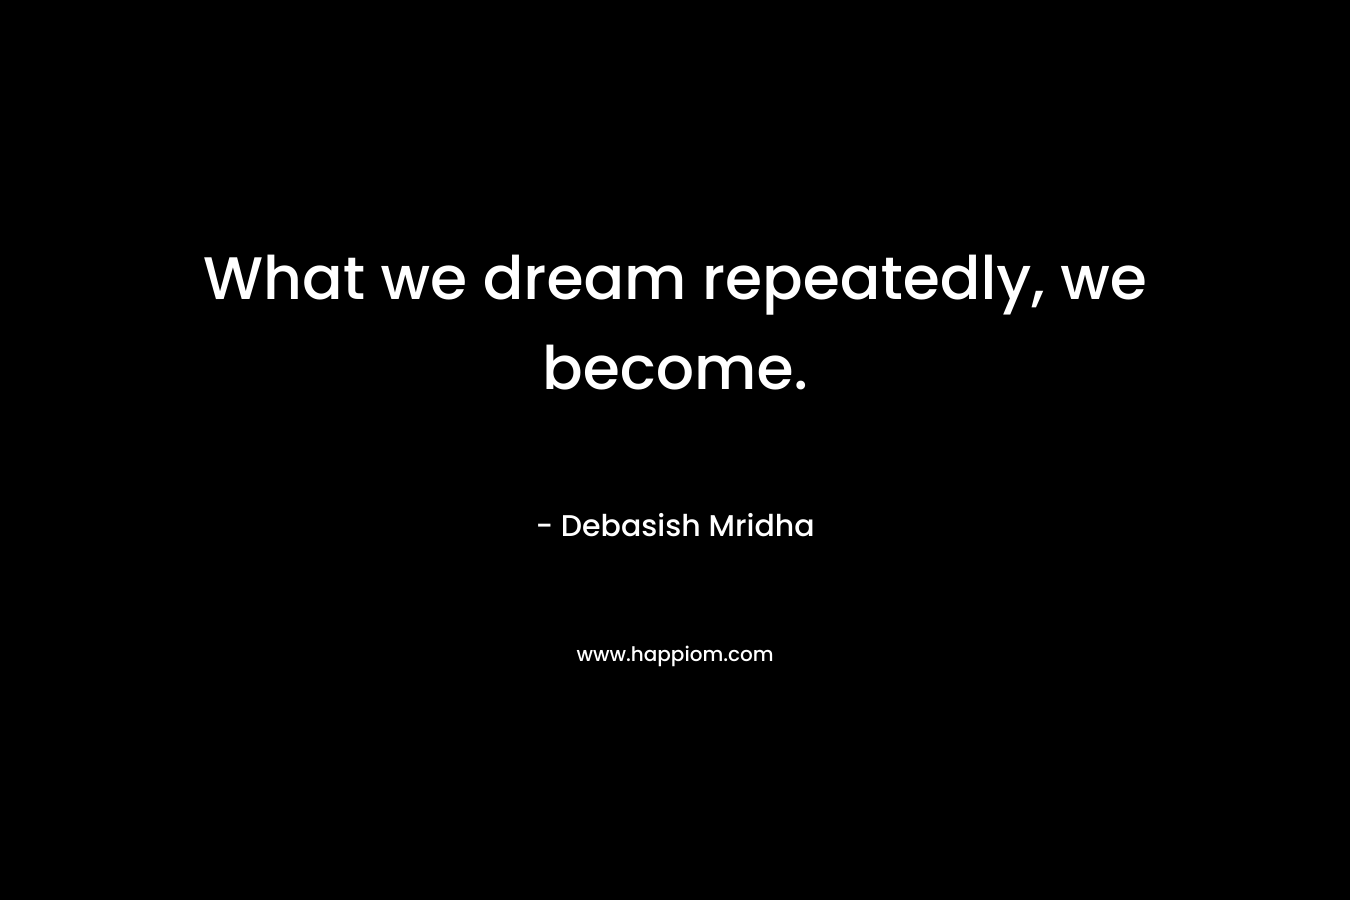 What we dream repeatedly, we become.